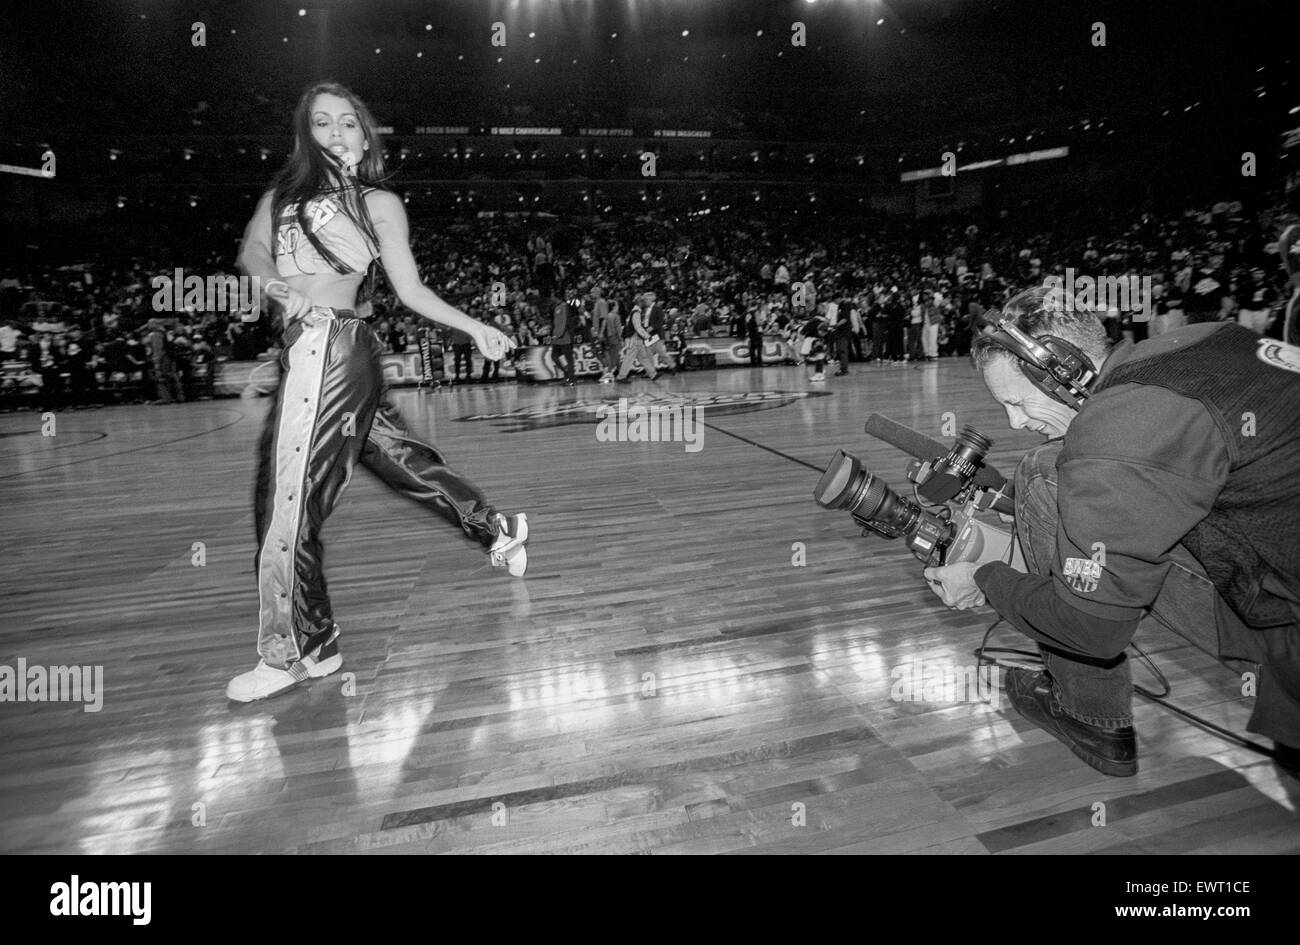 OAKLAND, CA – FEBRUARY 13: The NBA All-Star Game held in Oakland, California on February 13, 2000. Stock Photo